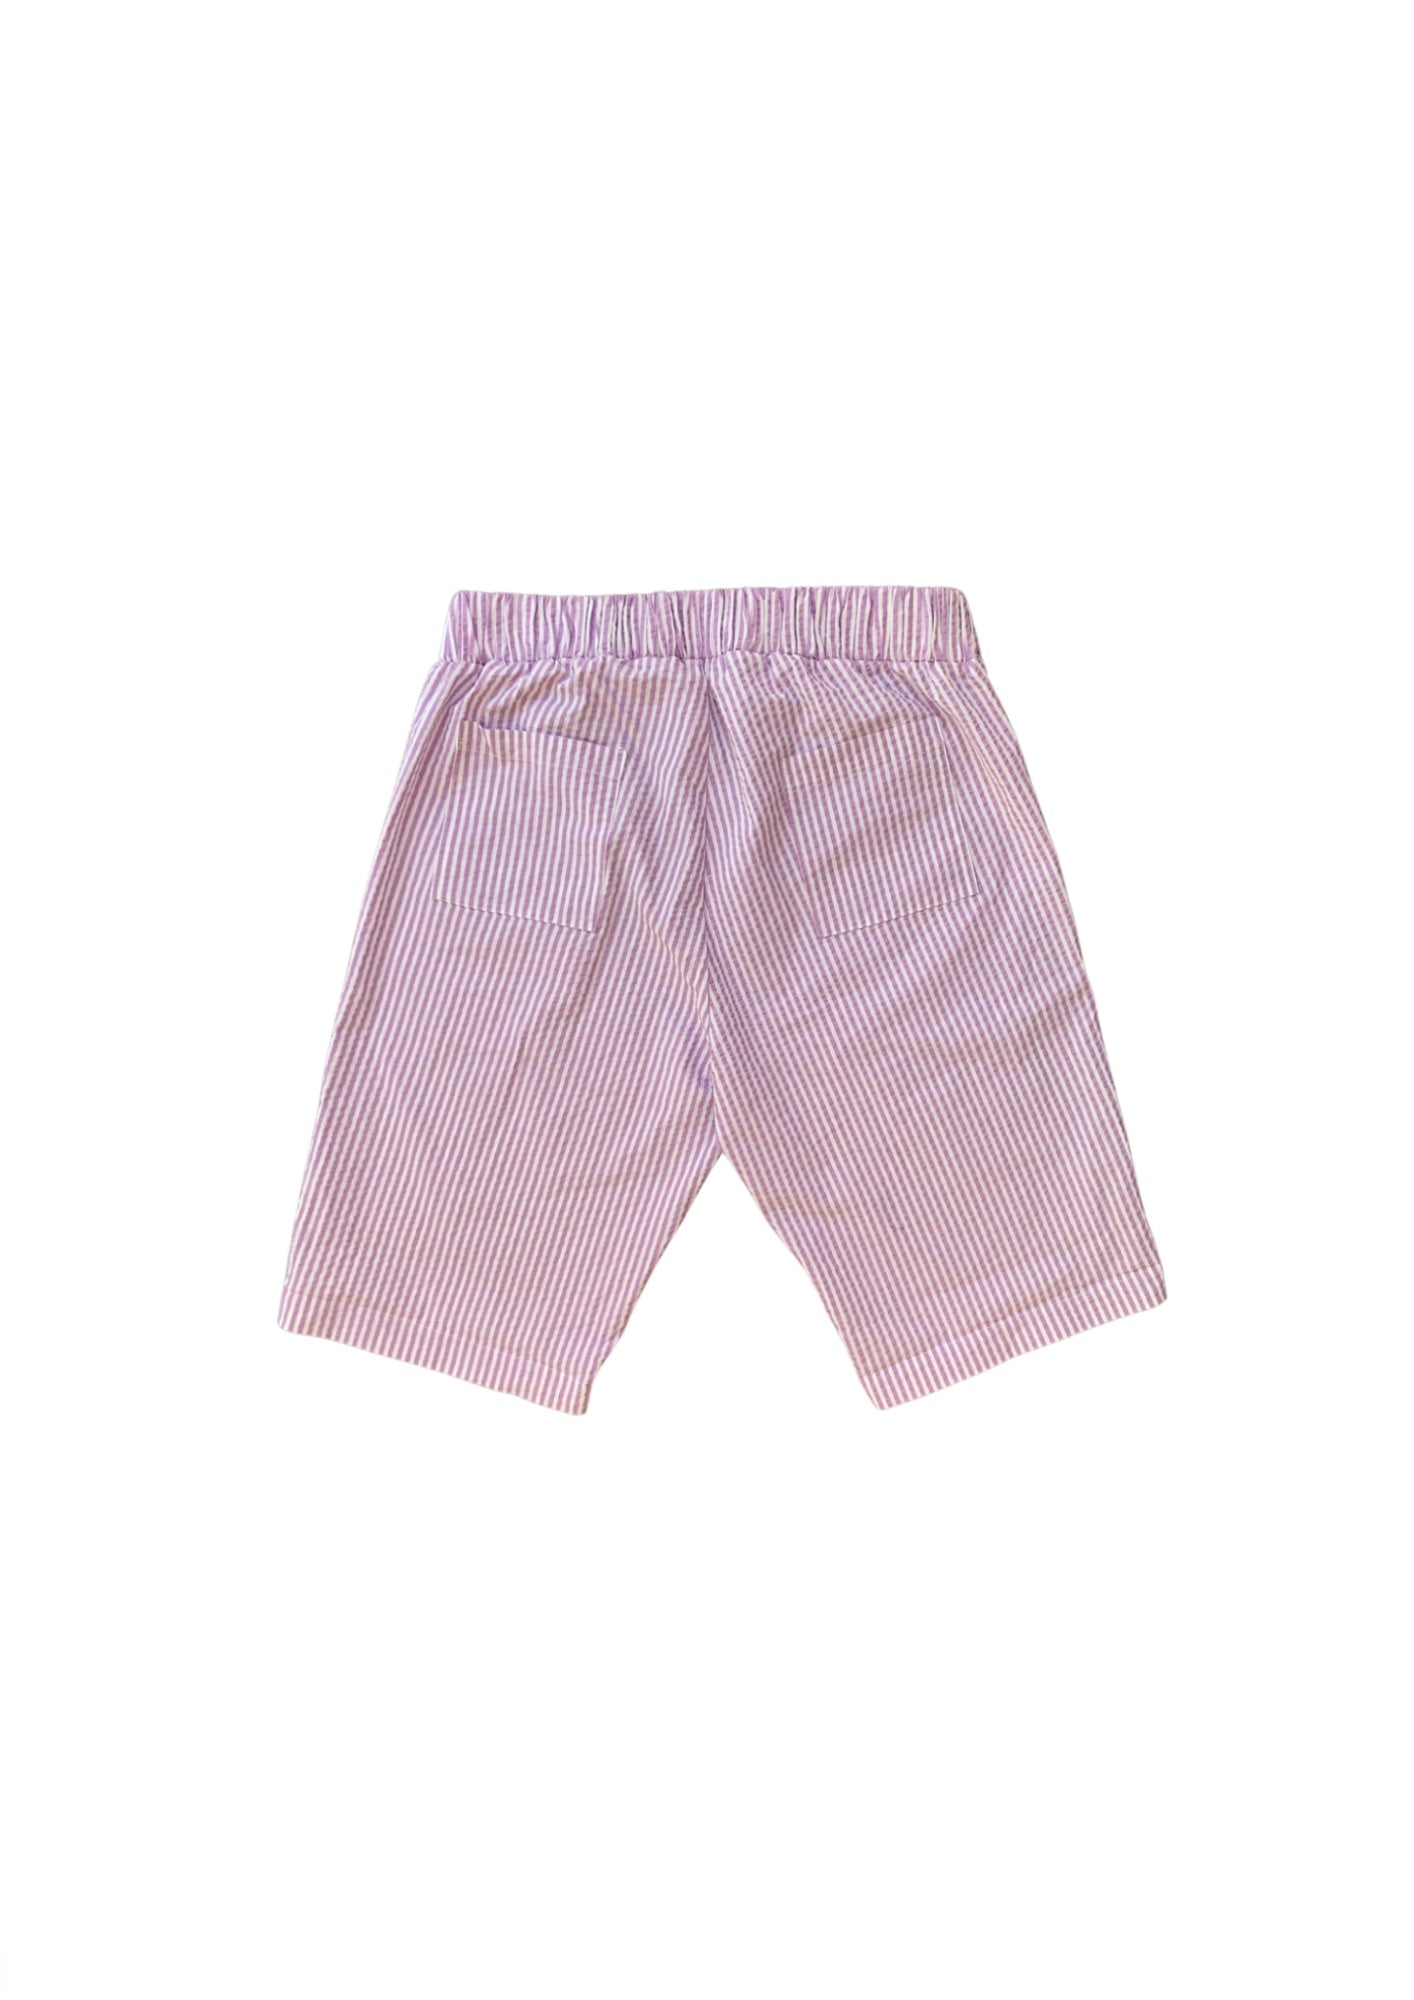 Bermuda shorts MARJ sustainable ethical streetwear made in France